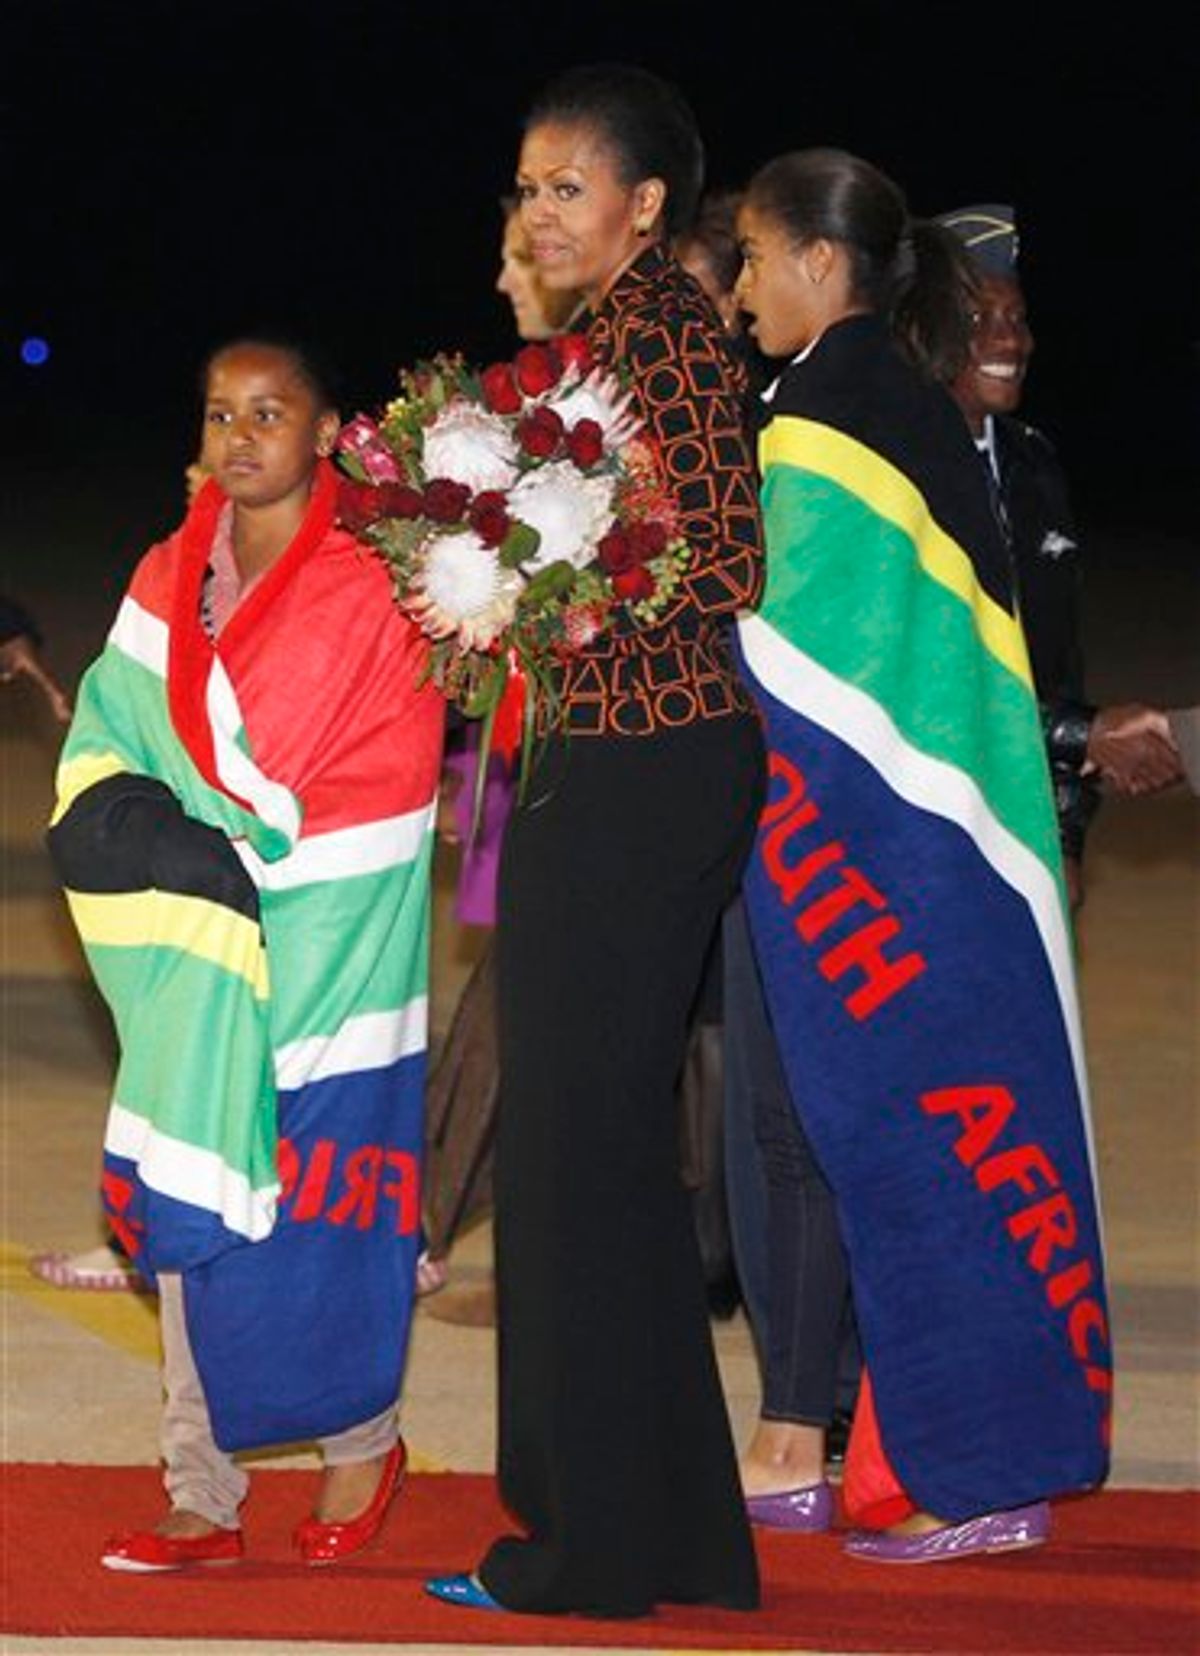 First lady Michelle Obama holds a bouquet of flowers, and daughters Malia, right, and Sasha, are draped in blankets given to them upon landing in Pretoria, en route to Johannesburg, South Africa, Monday, June 20, 2011, as they begin their week long trip to Africa. (AP Photo/Charles Dharapak, Pool)  (AP)